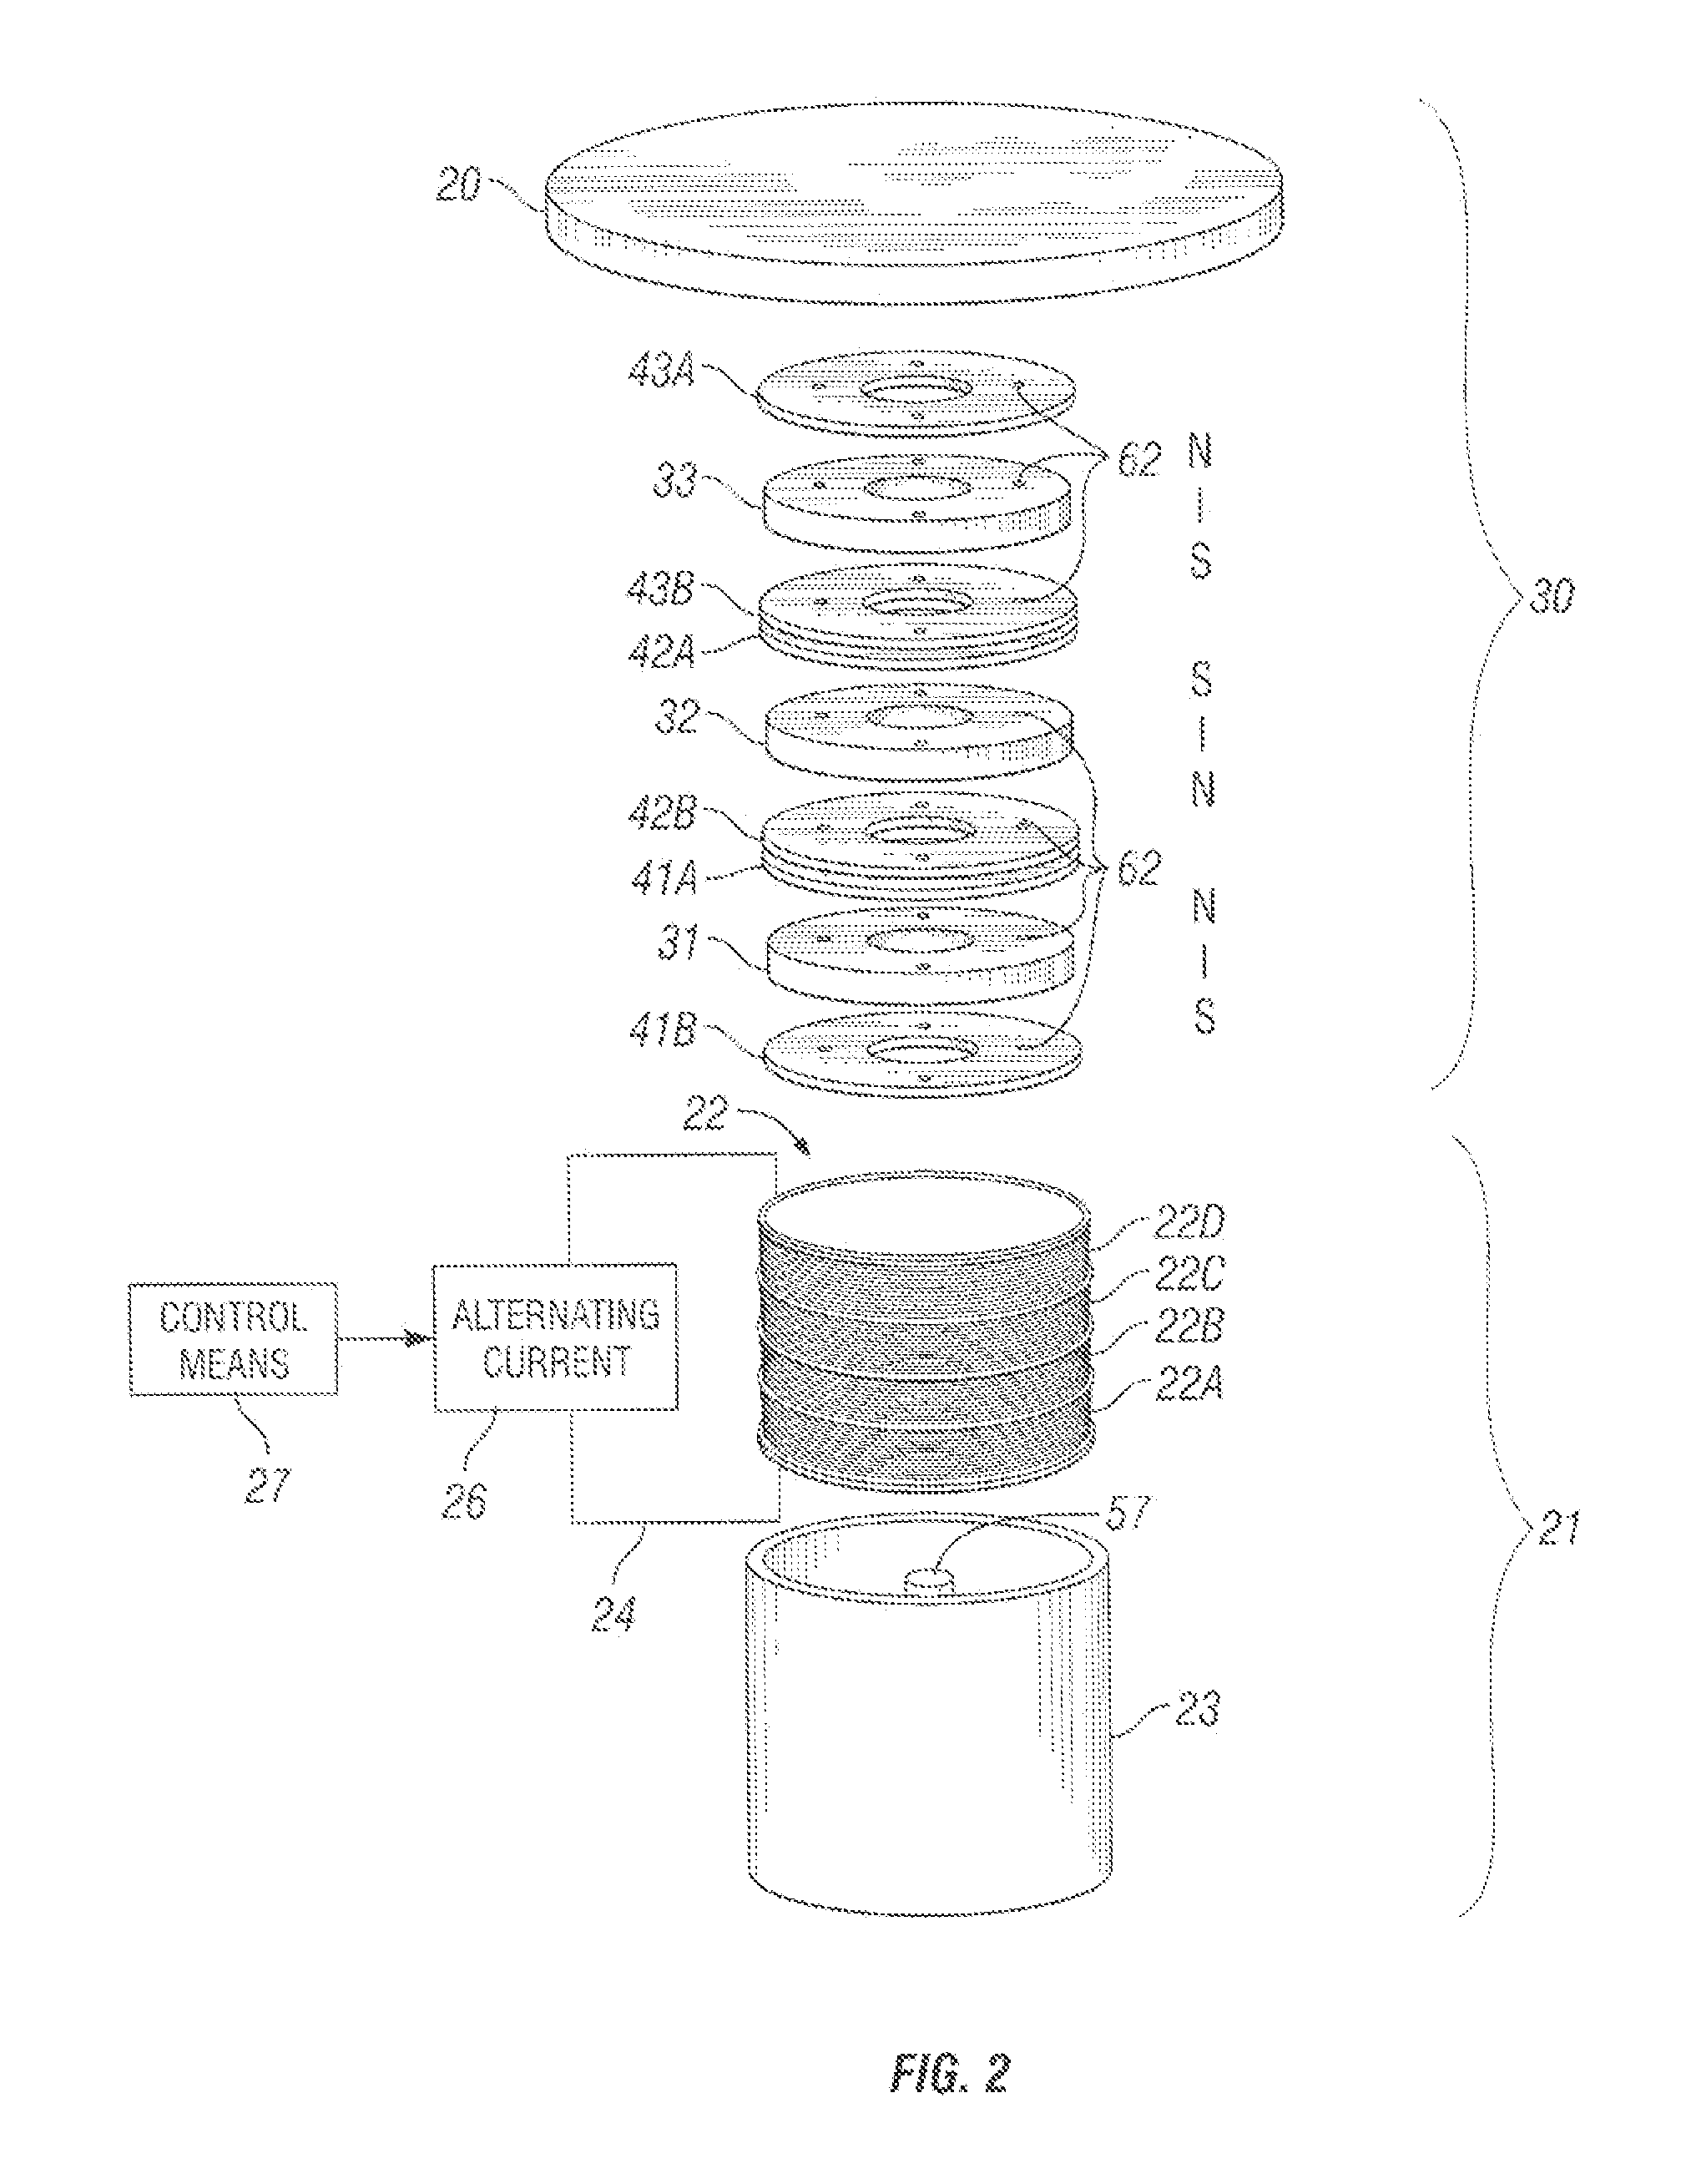 Linear motor for imparting vibration to a supported body